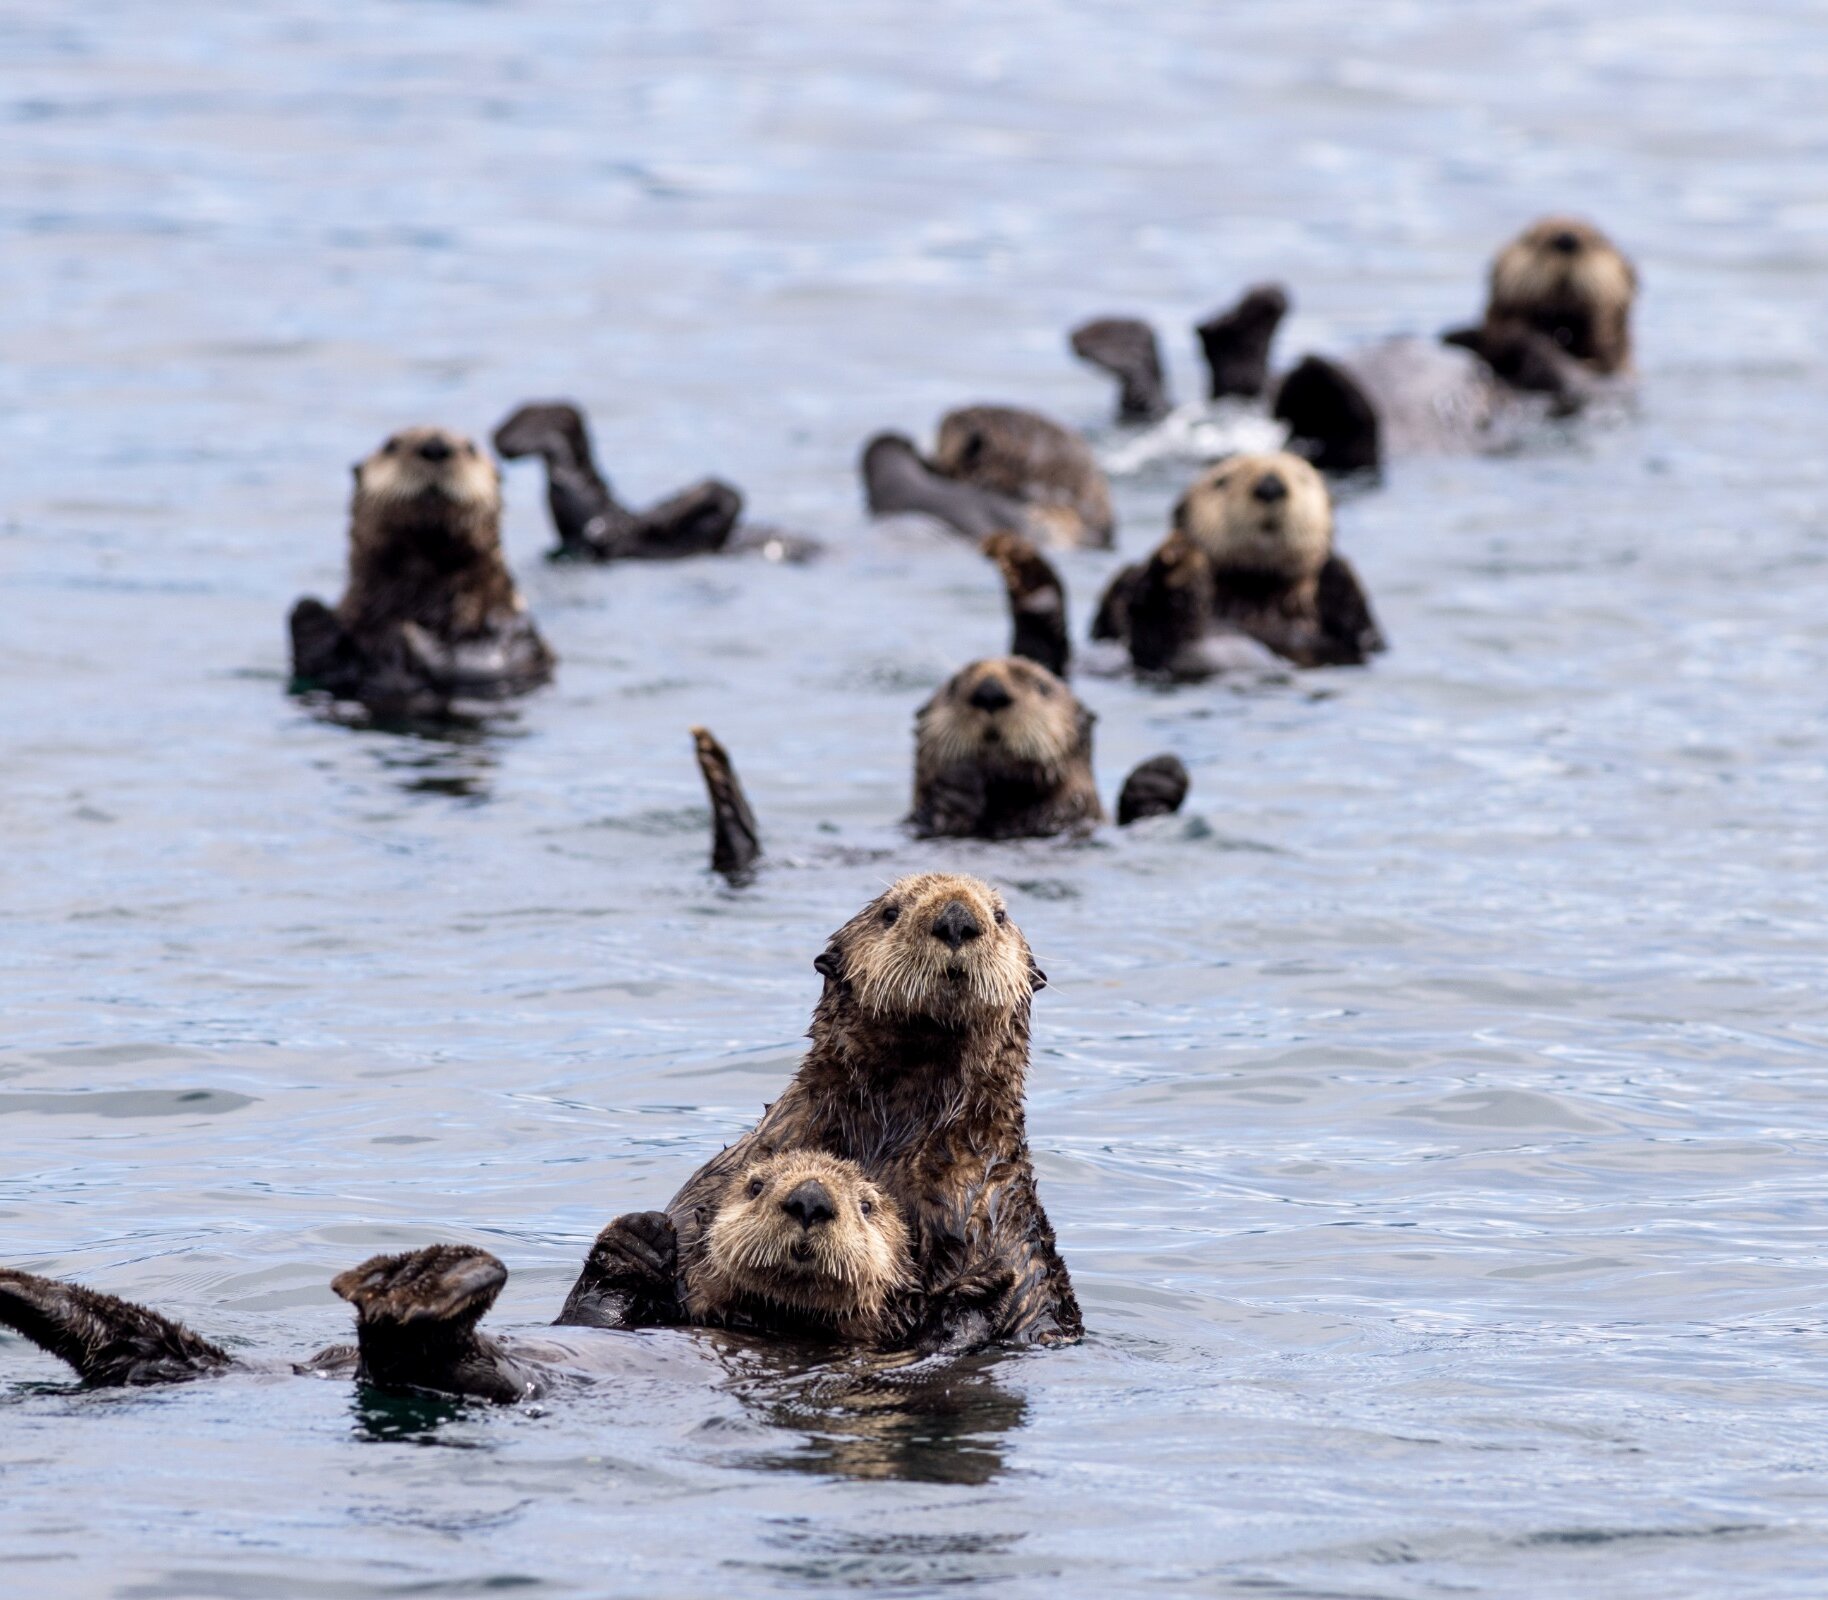 A group of otters floating on their backs looking at the camera